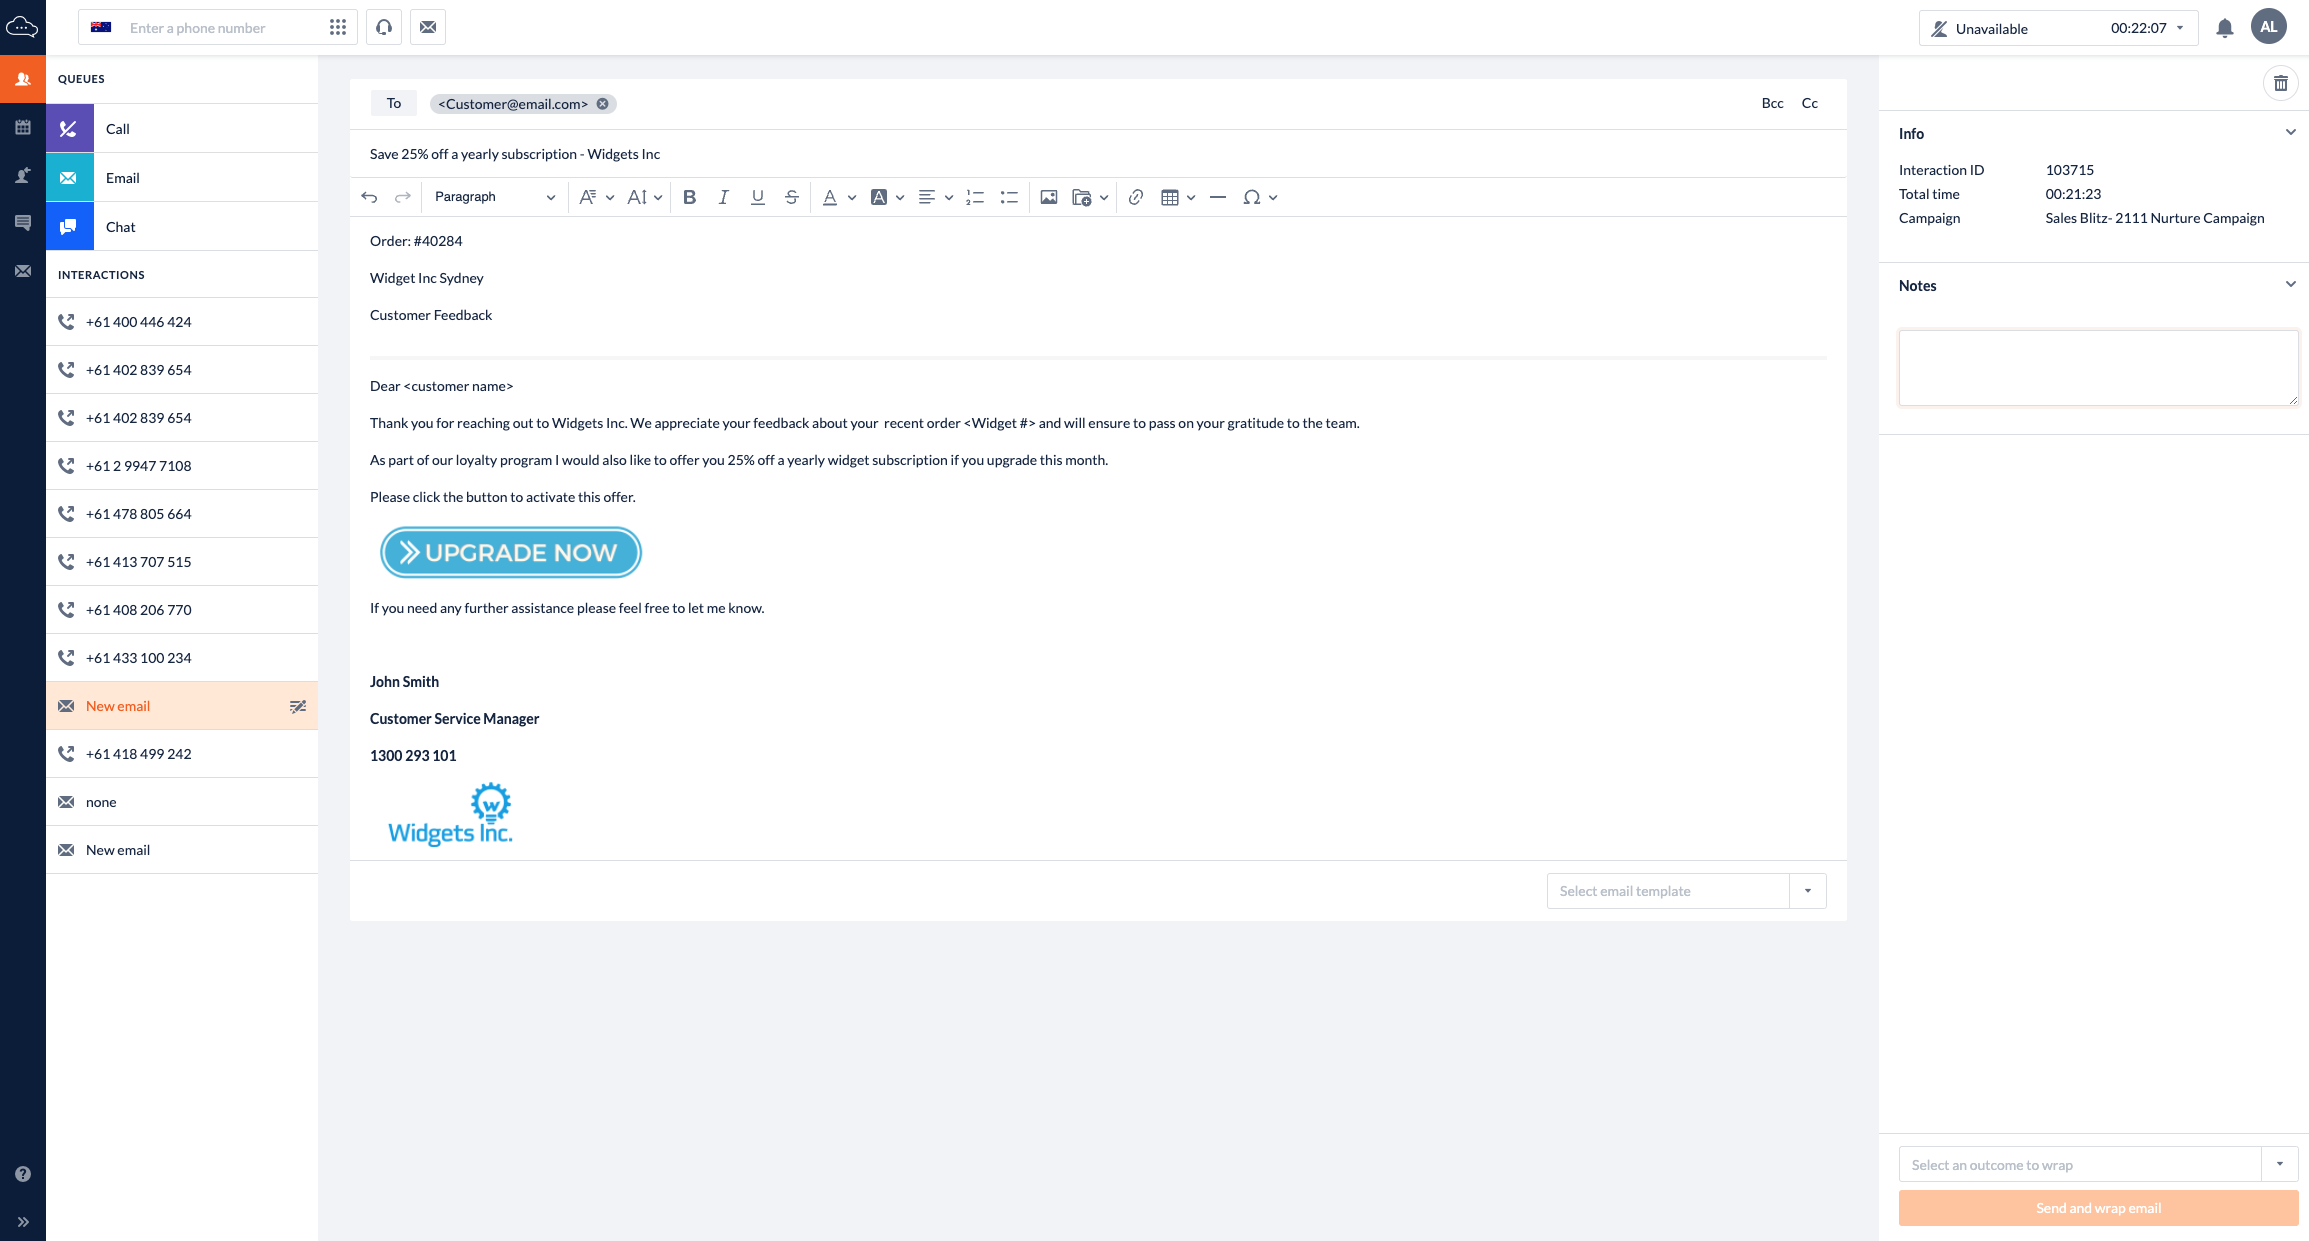 ipSCAPE Email helps you manage centralised inboxes. Allocate emails to teams based on keywords or subject topics. Access templates to improve response times.